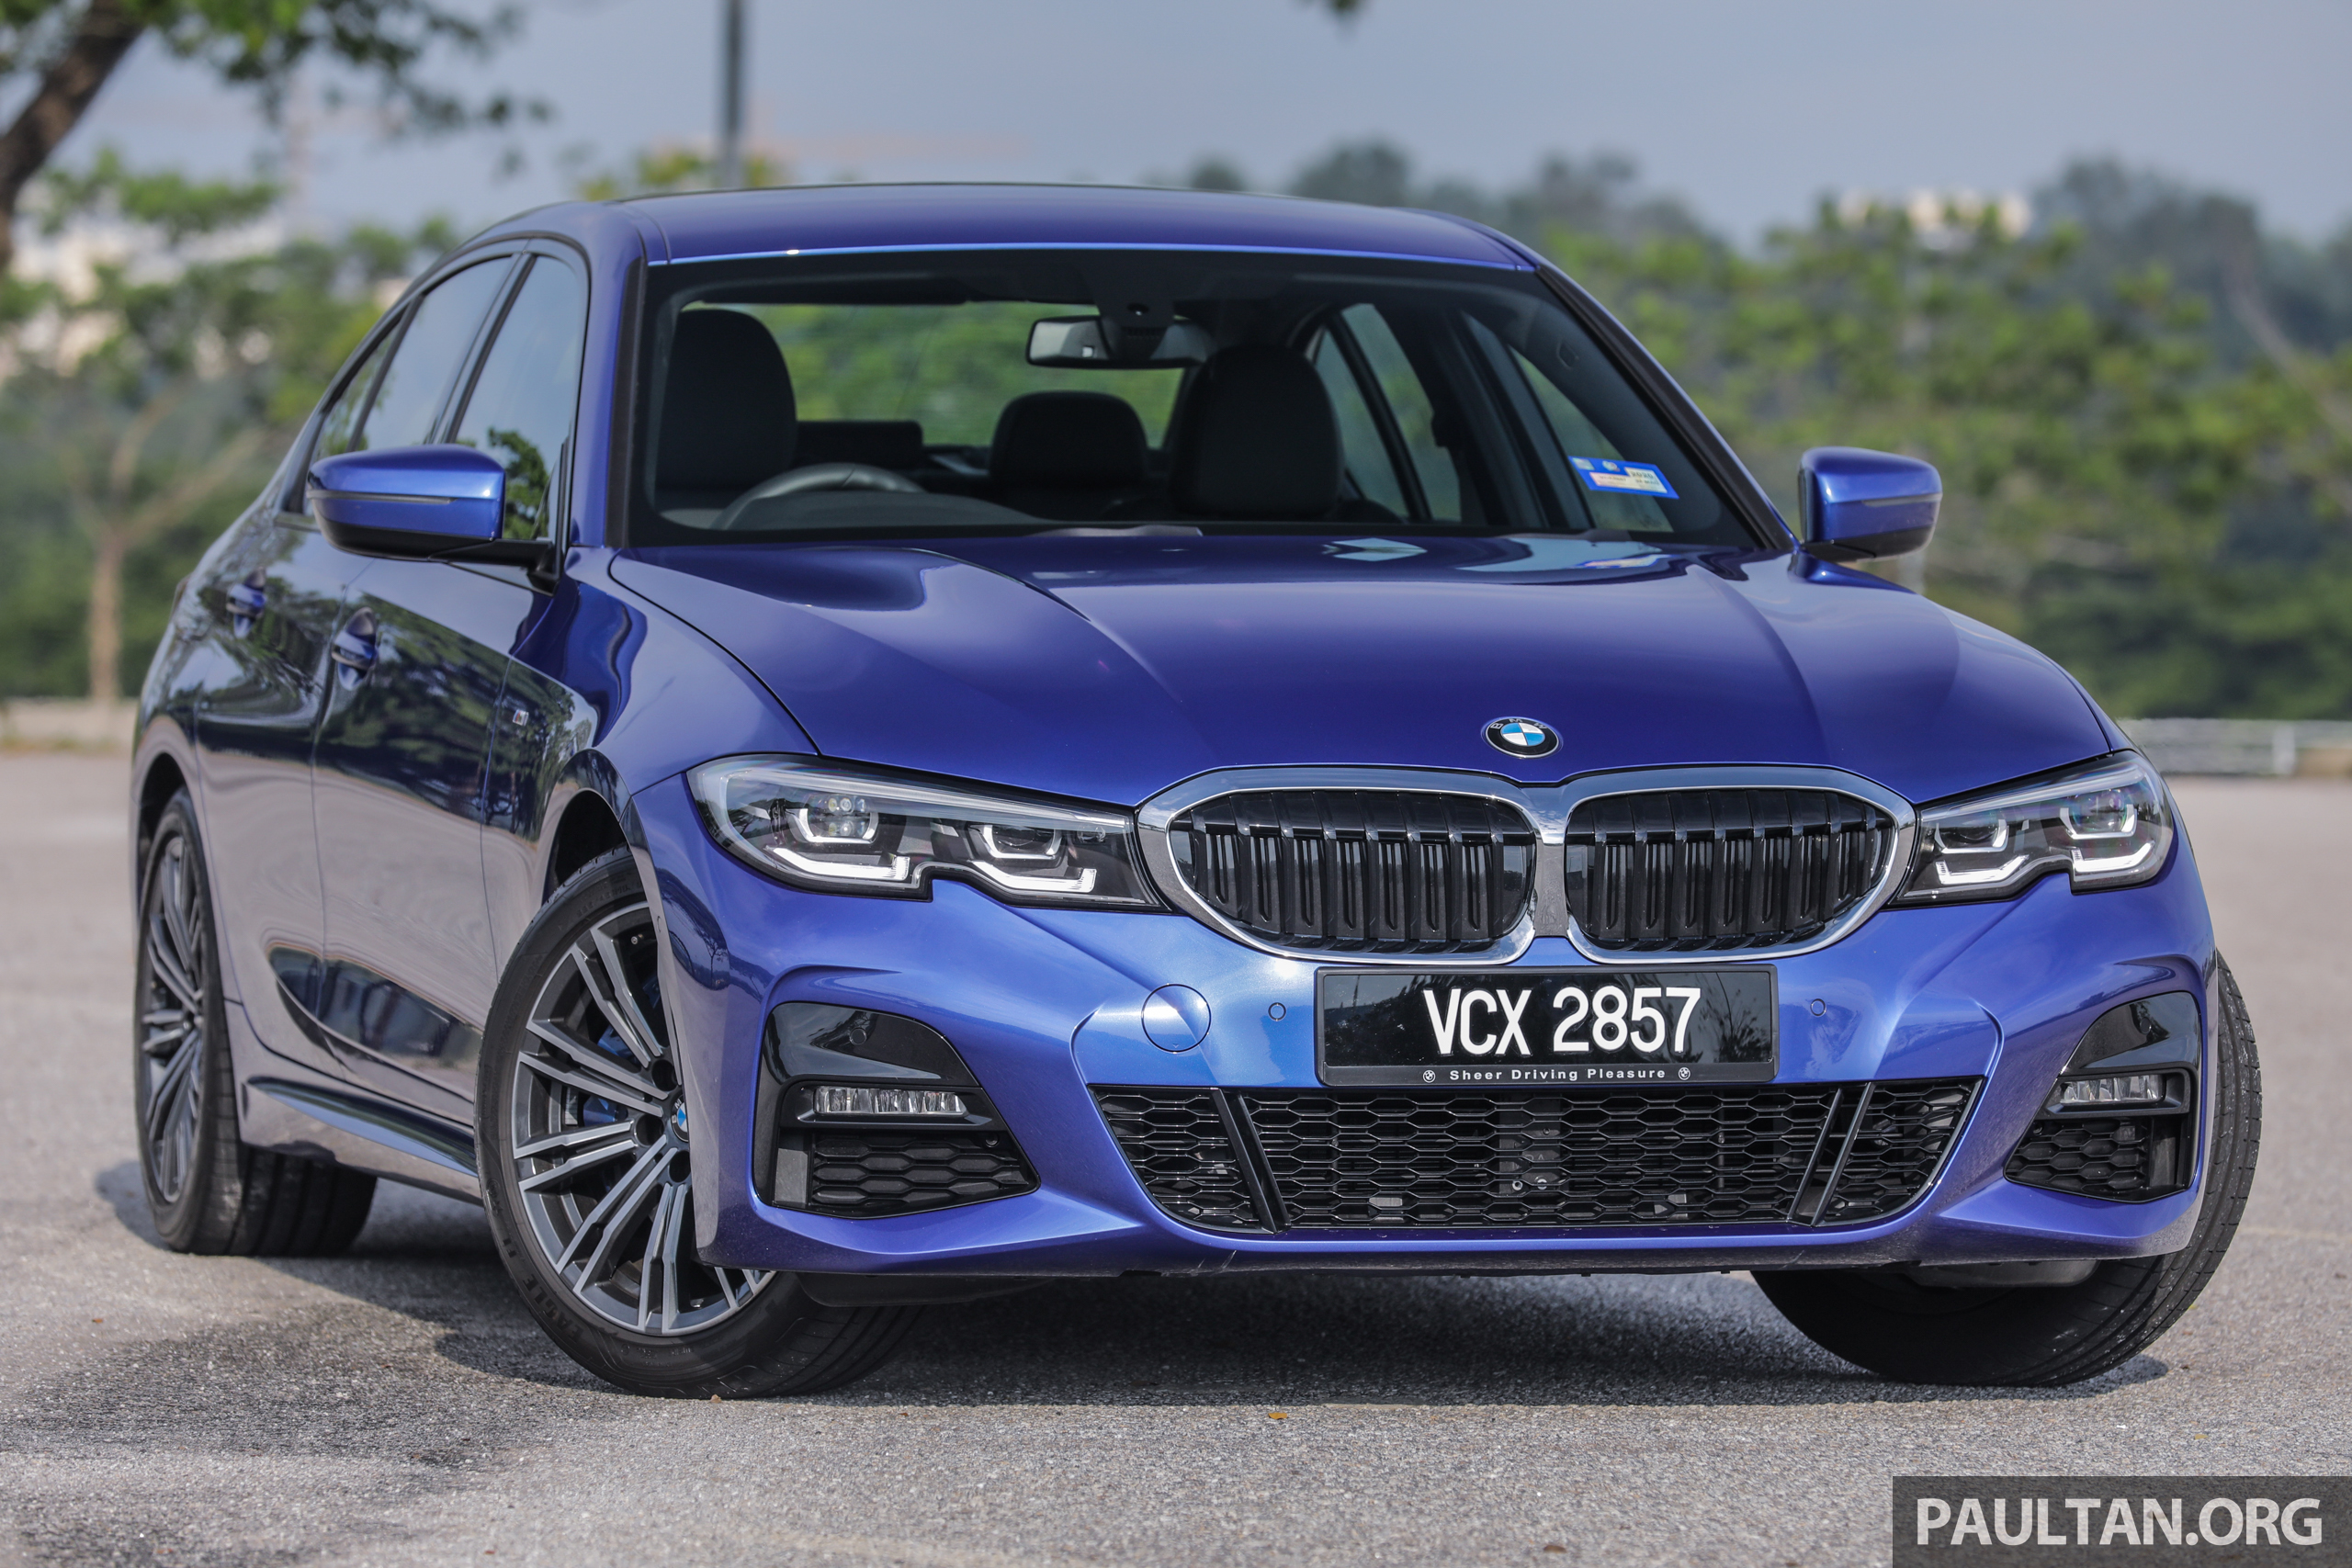 G20 Bmw 3 Series Ckd Launched In Malaysia Same 330i Spec Rm40k Cheaper Than Cbu From Rm289k Paultan Org